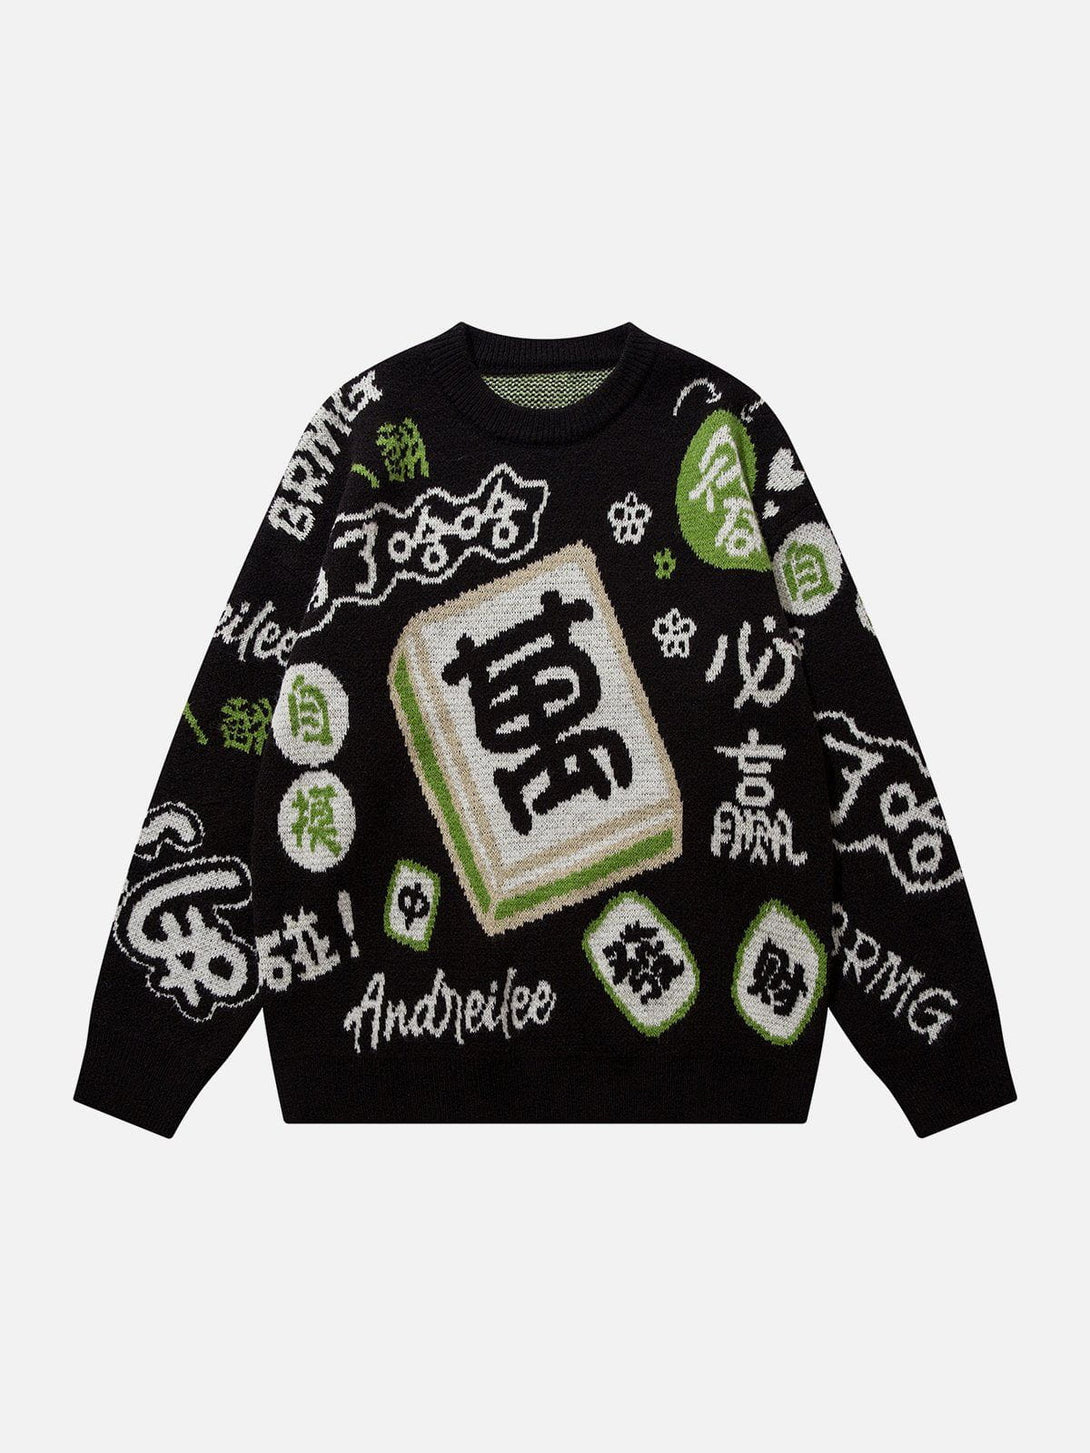 Levefly - Mahjong Embroidery Sweater - Streetwear Fashion - levefly.com